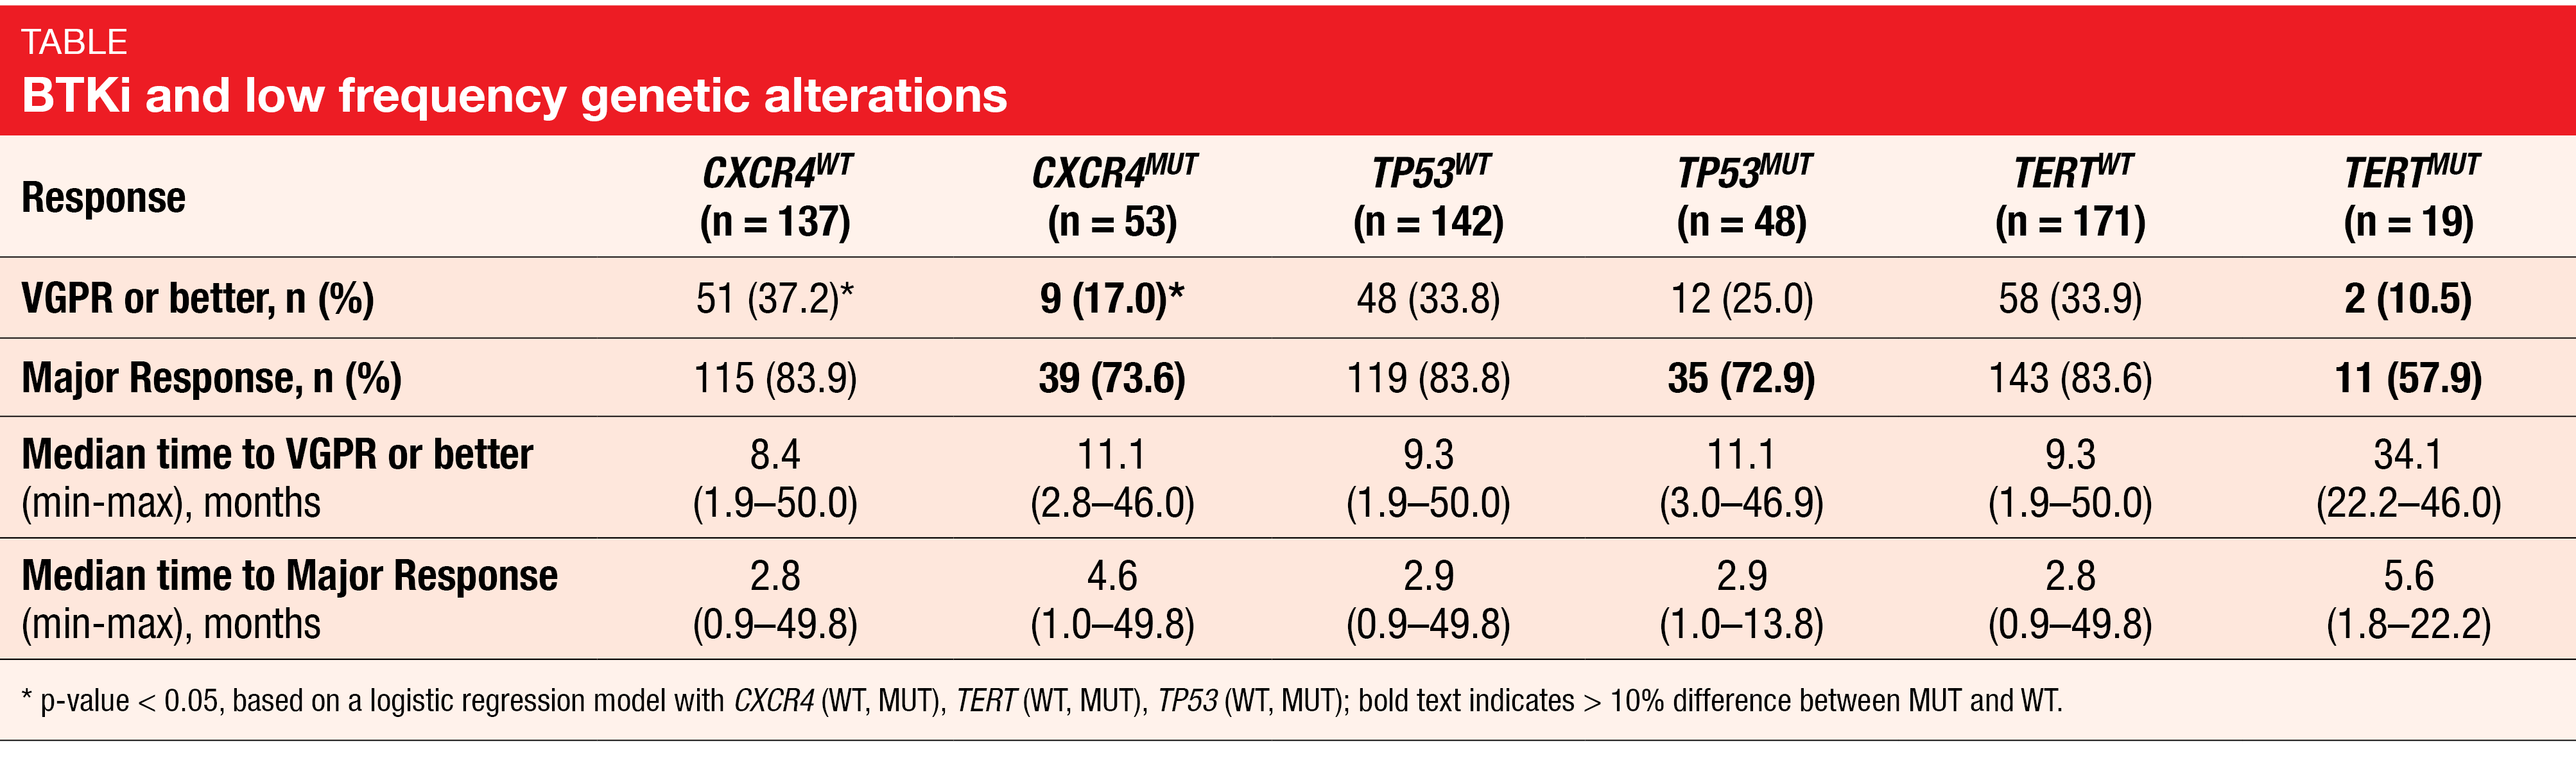 Table BTKi and low frequency genetic alterations